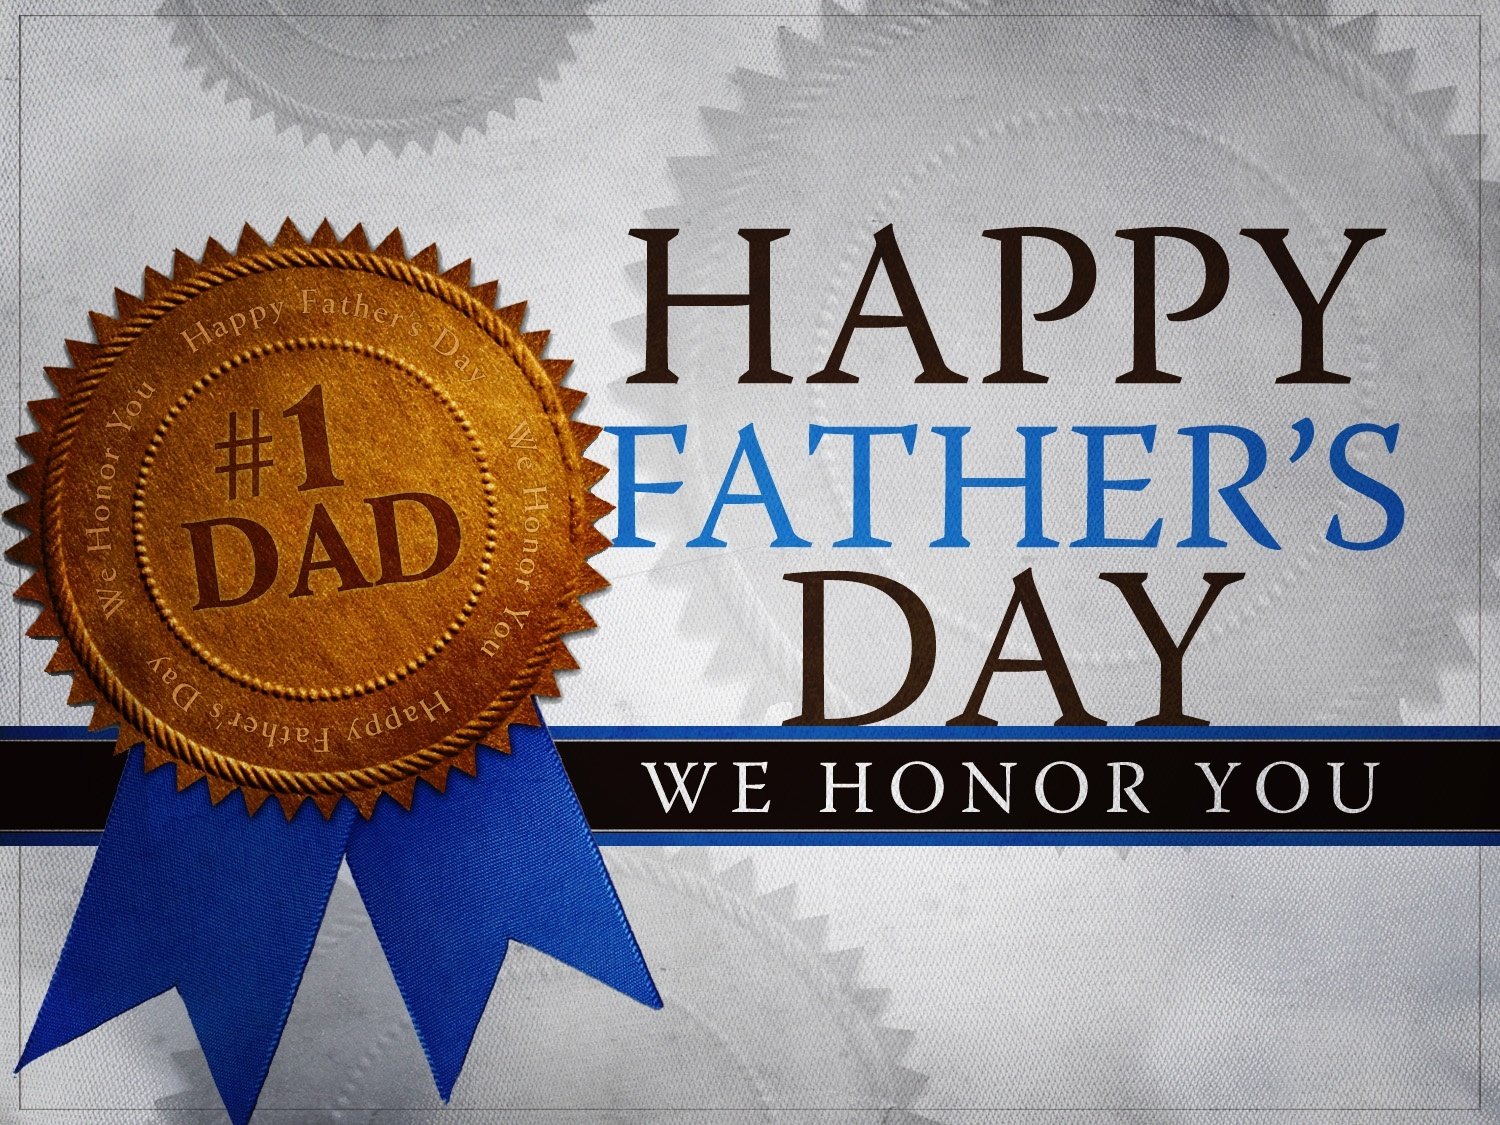 Fathers Day Website #keepProtocol